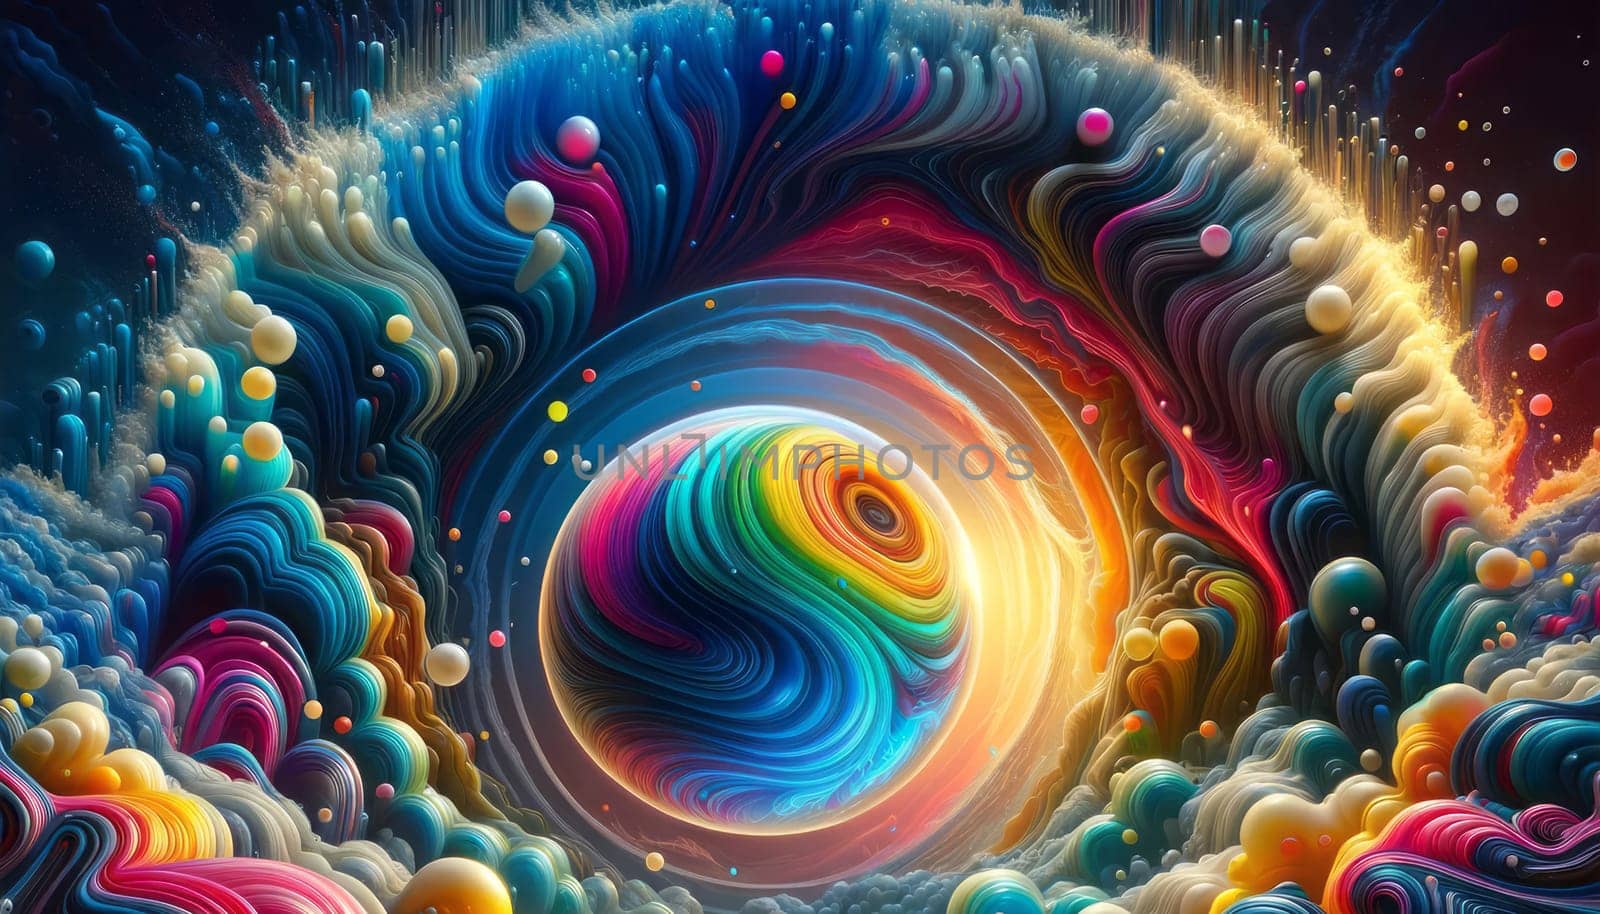 A wide digital illustration of a colorful, abstract scene with a bubble-like structure at the center. The structure has a swirled pattern with vibrant colors, creating a psychedelic effect. The colors inside the bubble are vivid and appear liquid, with blues, greens, yellows, oranges, and pinks blending into each other. Outside the bubble, the colors extend into the surroundings in a wavy, fluid motion, suggesting movement and energy. The background has darker tones that enhance the brightness of the colors, giving the impression of a cosmic or underwater scene filled with light and movement.